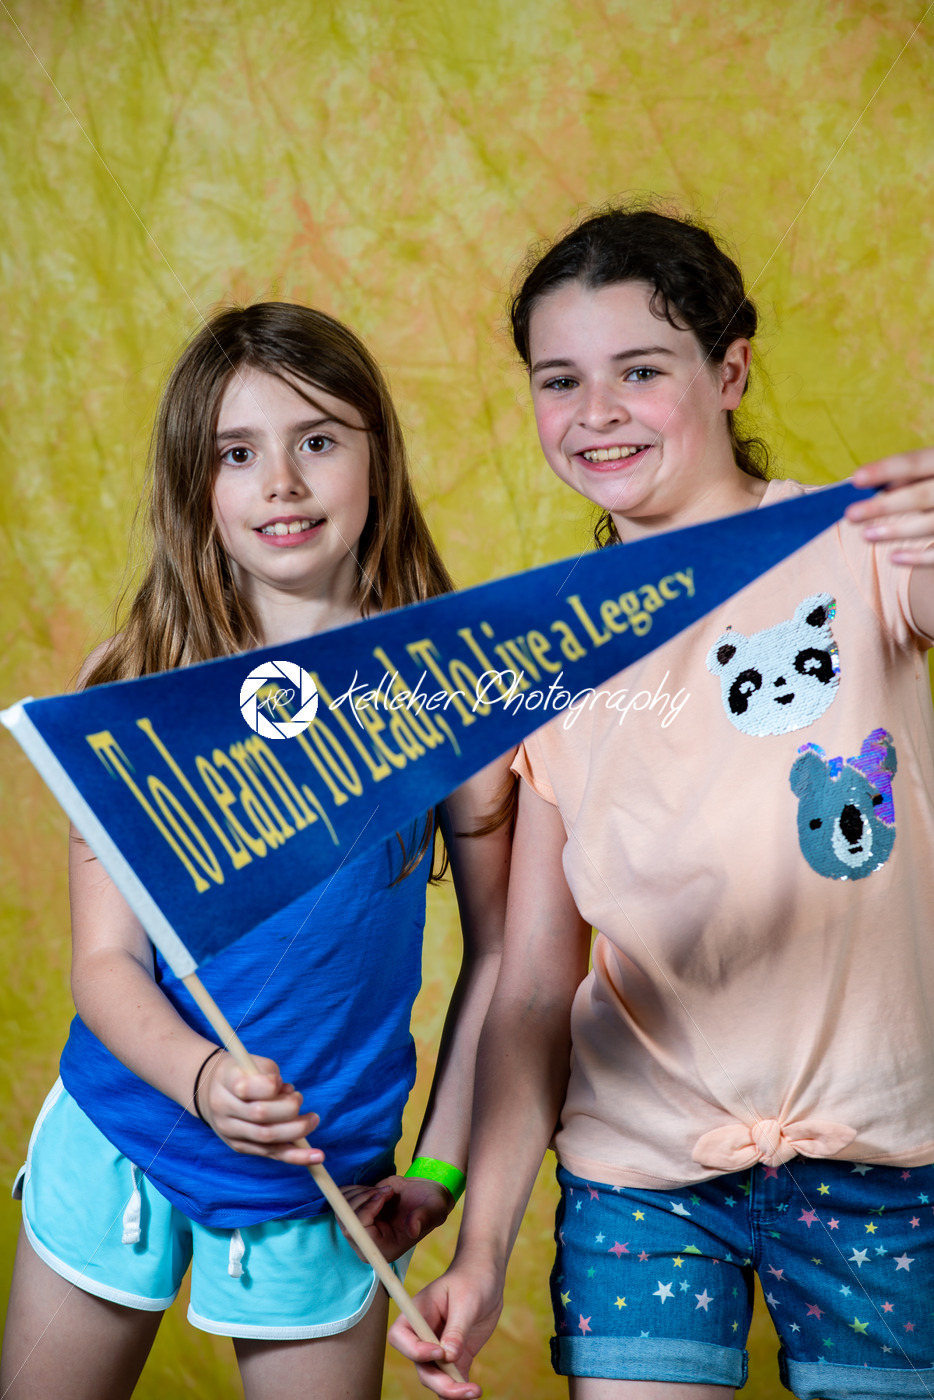 ROSEMONT, PA – MAY 15, 2019: Lower school May fair photo booth at The Agnes Irwin School - Kelleher Photography Store